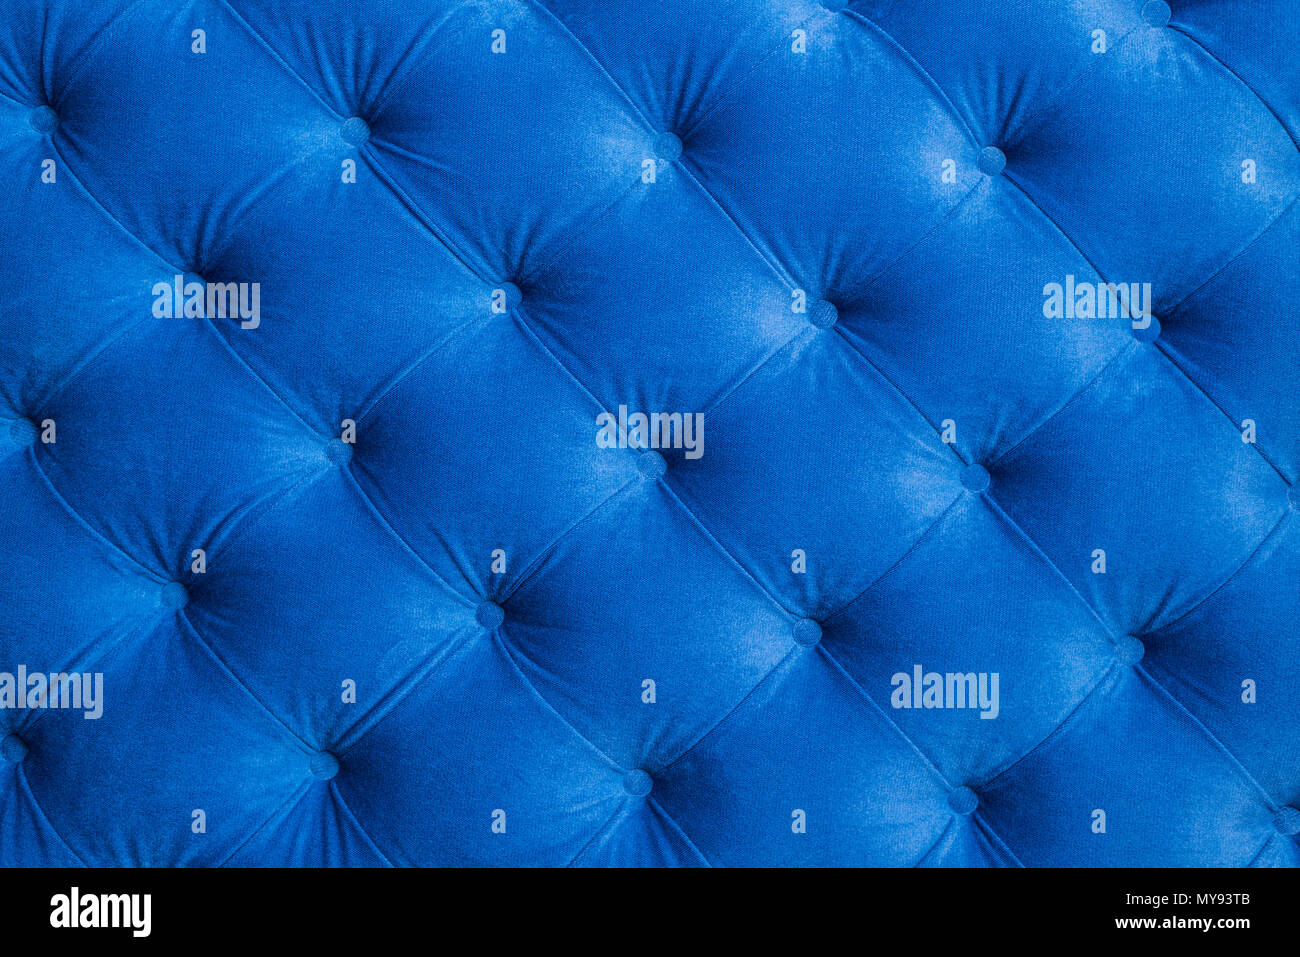 The surface is sheathed with blue material Stock Photo